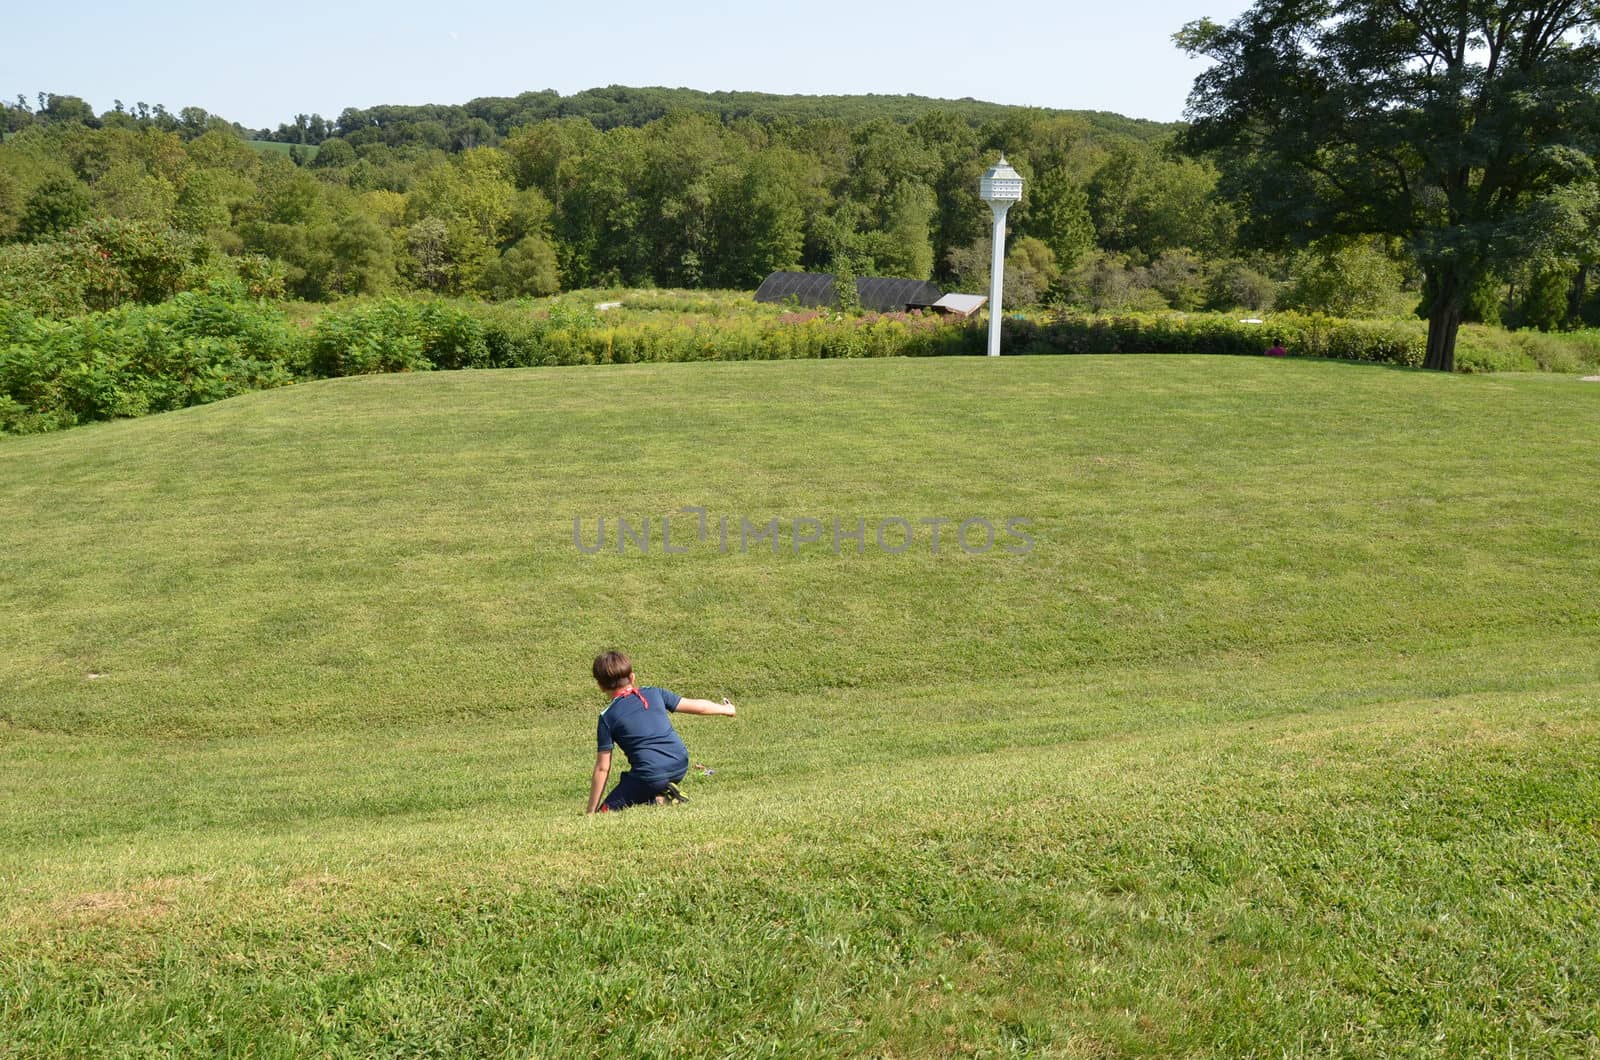 boy child rolling down a grass hill or lawn